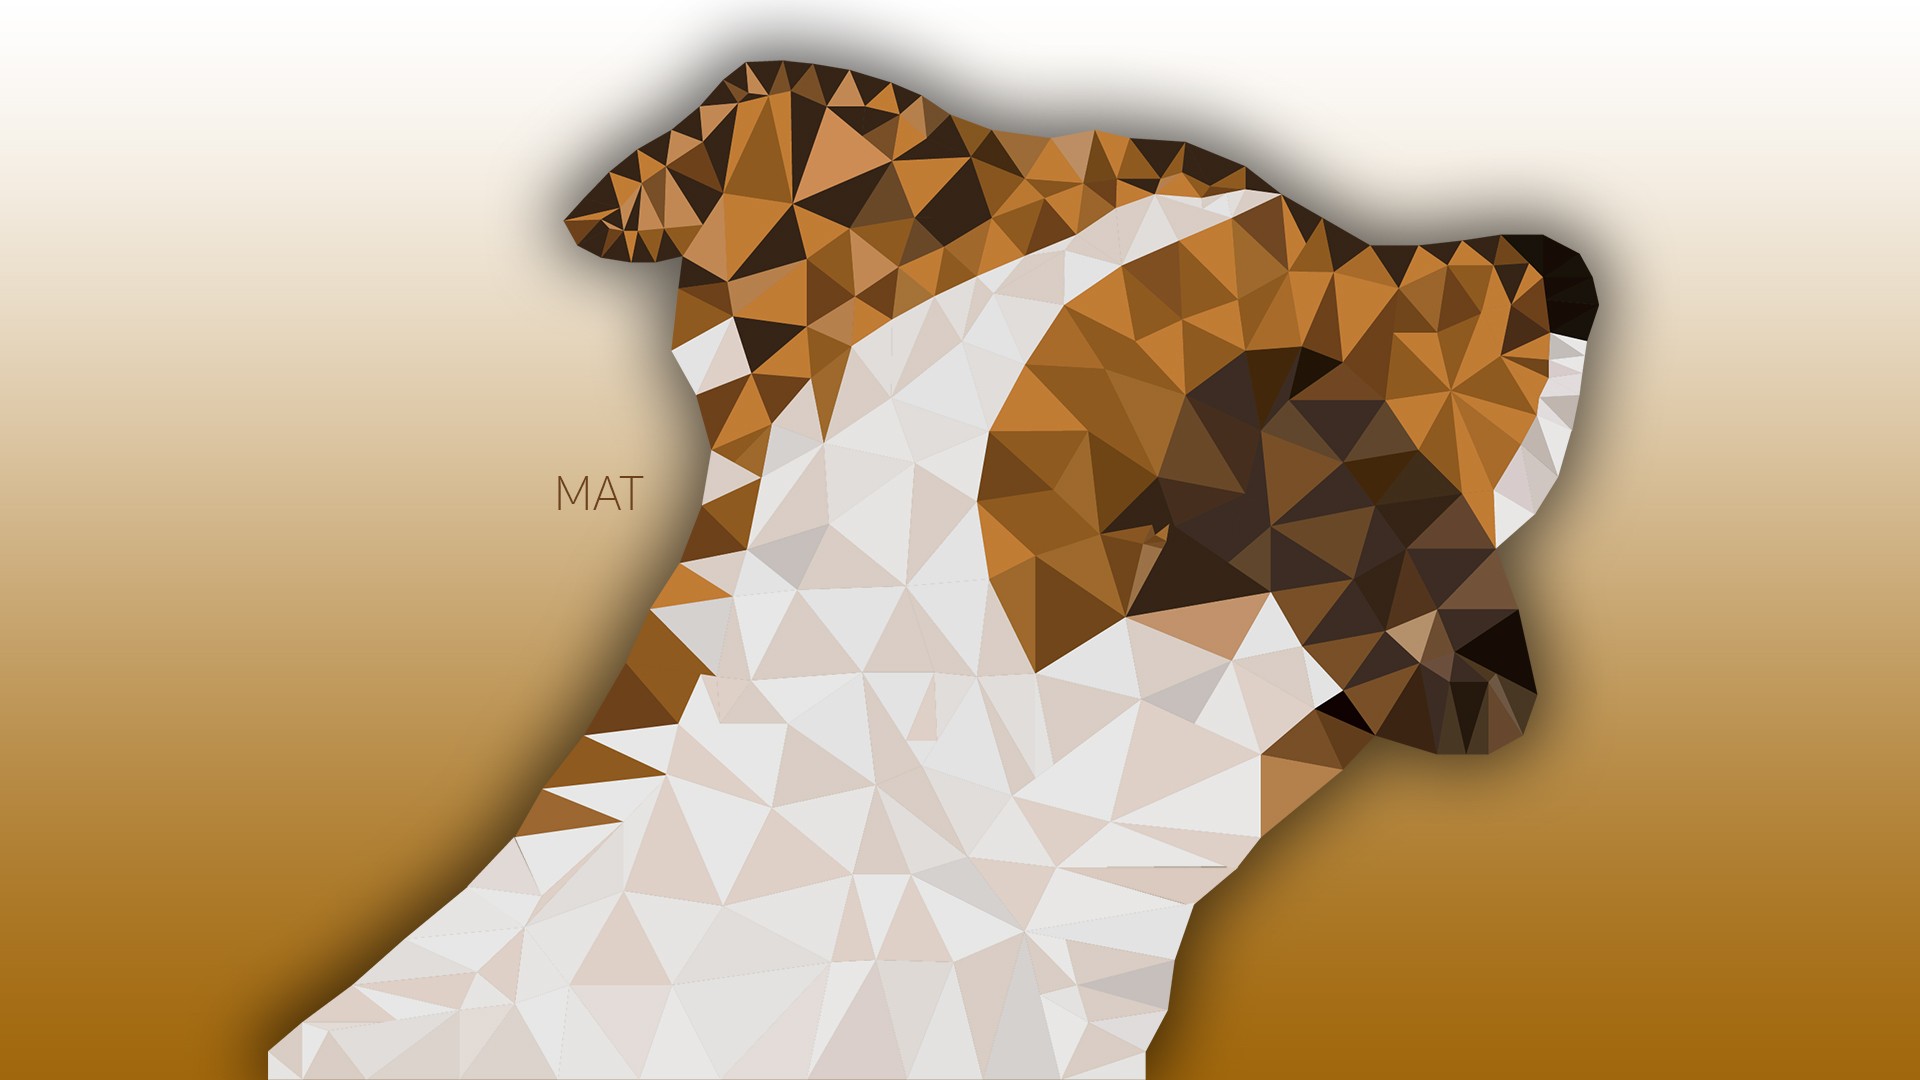 General 1920x1080 animals poly low poly dog mammals digital art gradient simple background